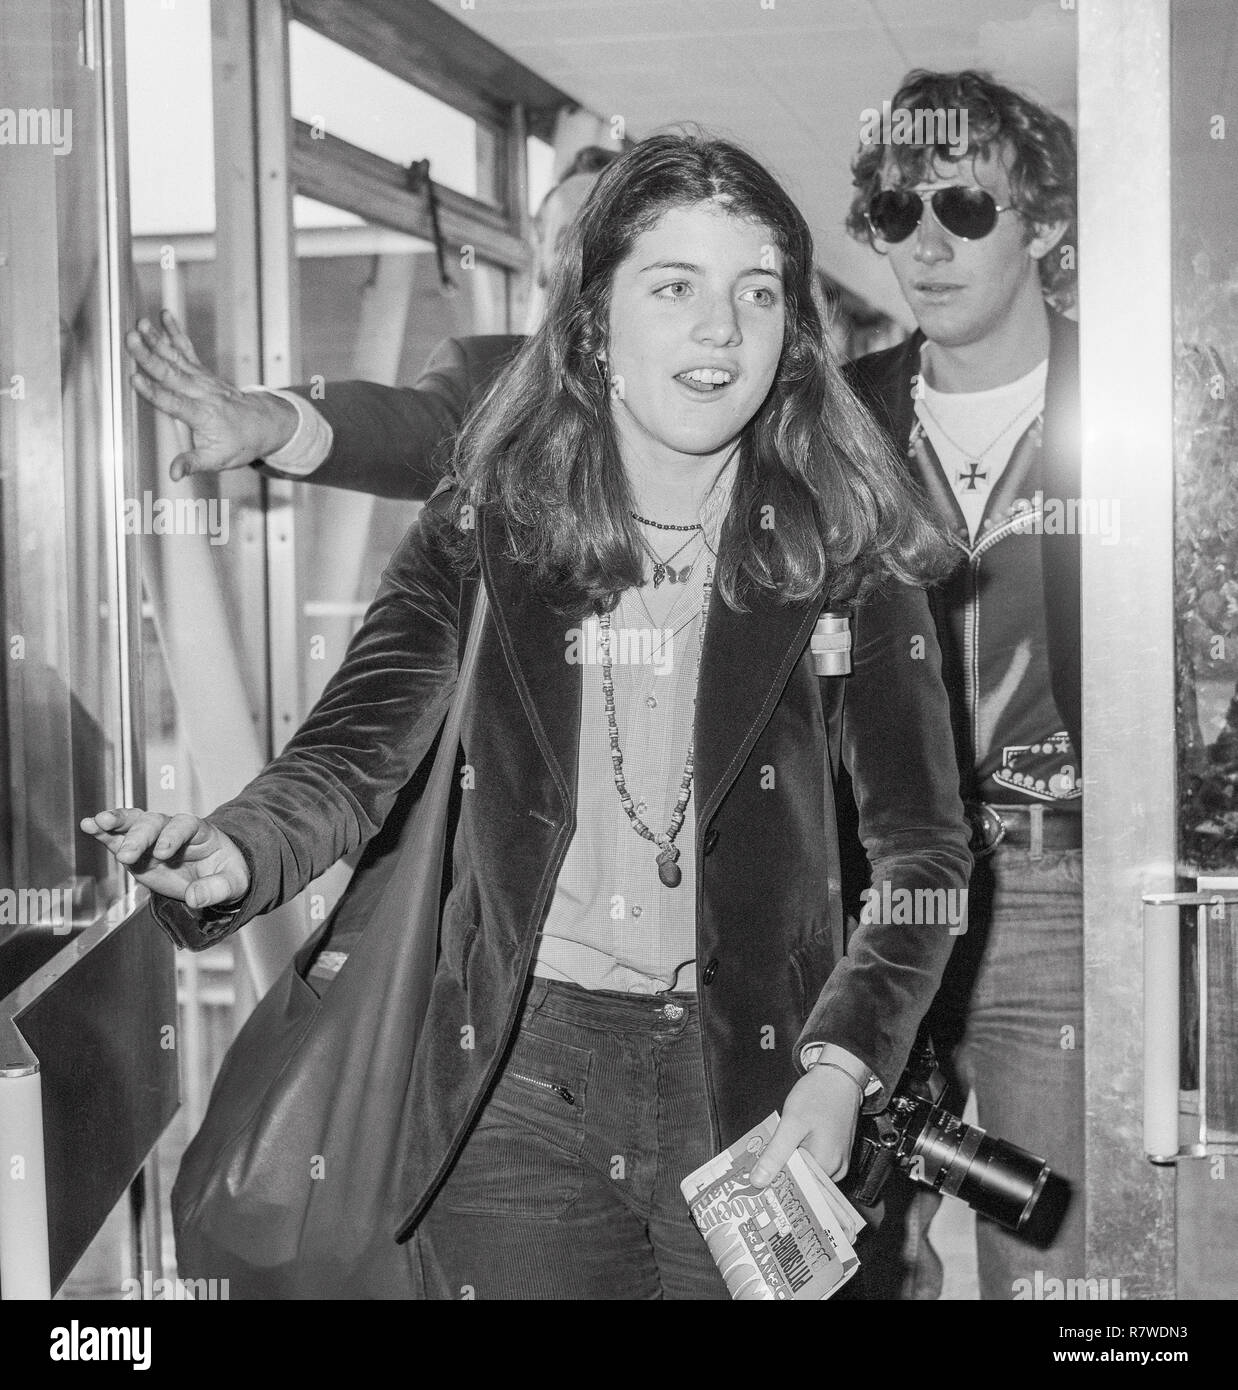 Caroline Kennedy and Mark Shand leaving Heathrow Airport in London in 1976 Stock Photo